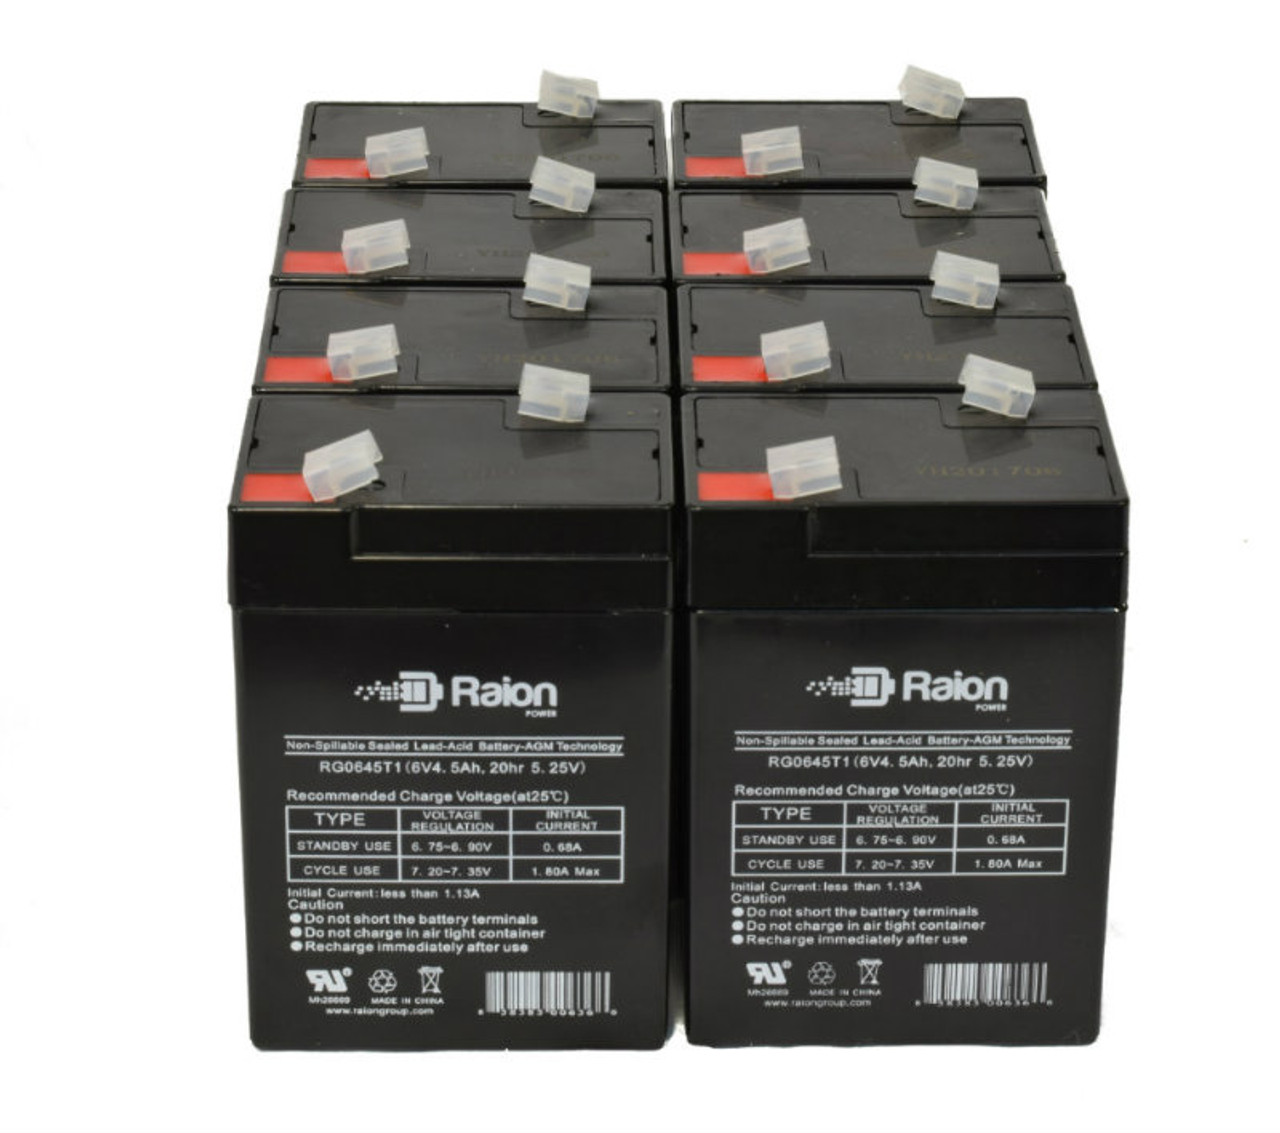 Raion Power 6V 4.5Ah Replacement Emergency Light Battery for Exitronix 640 - 8 Pack